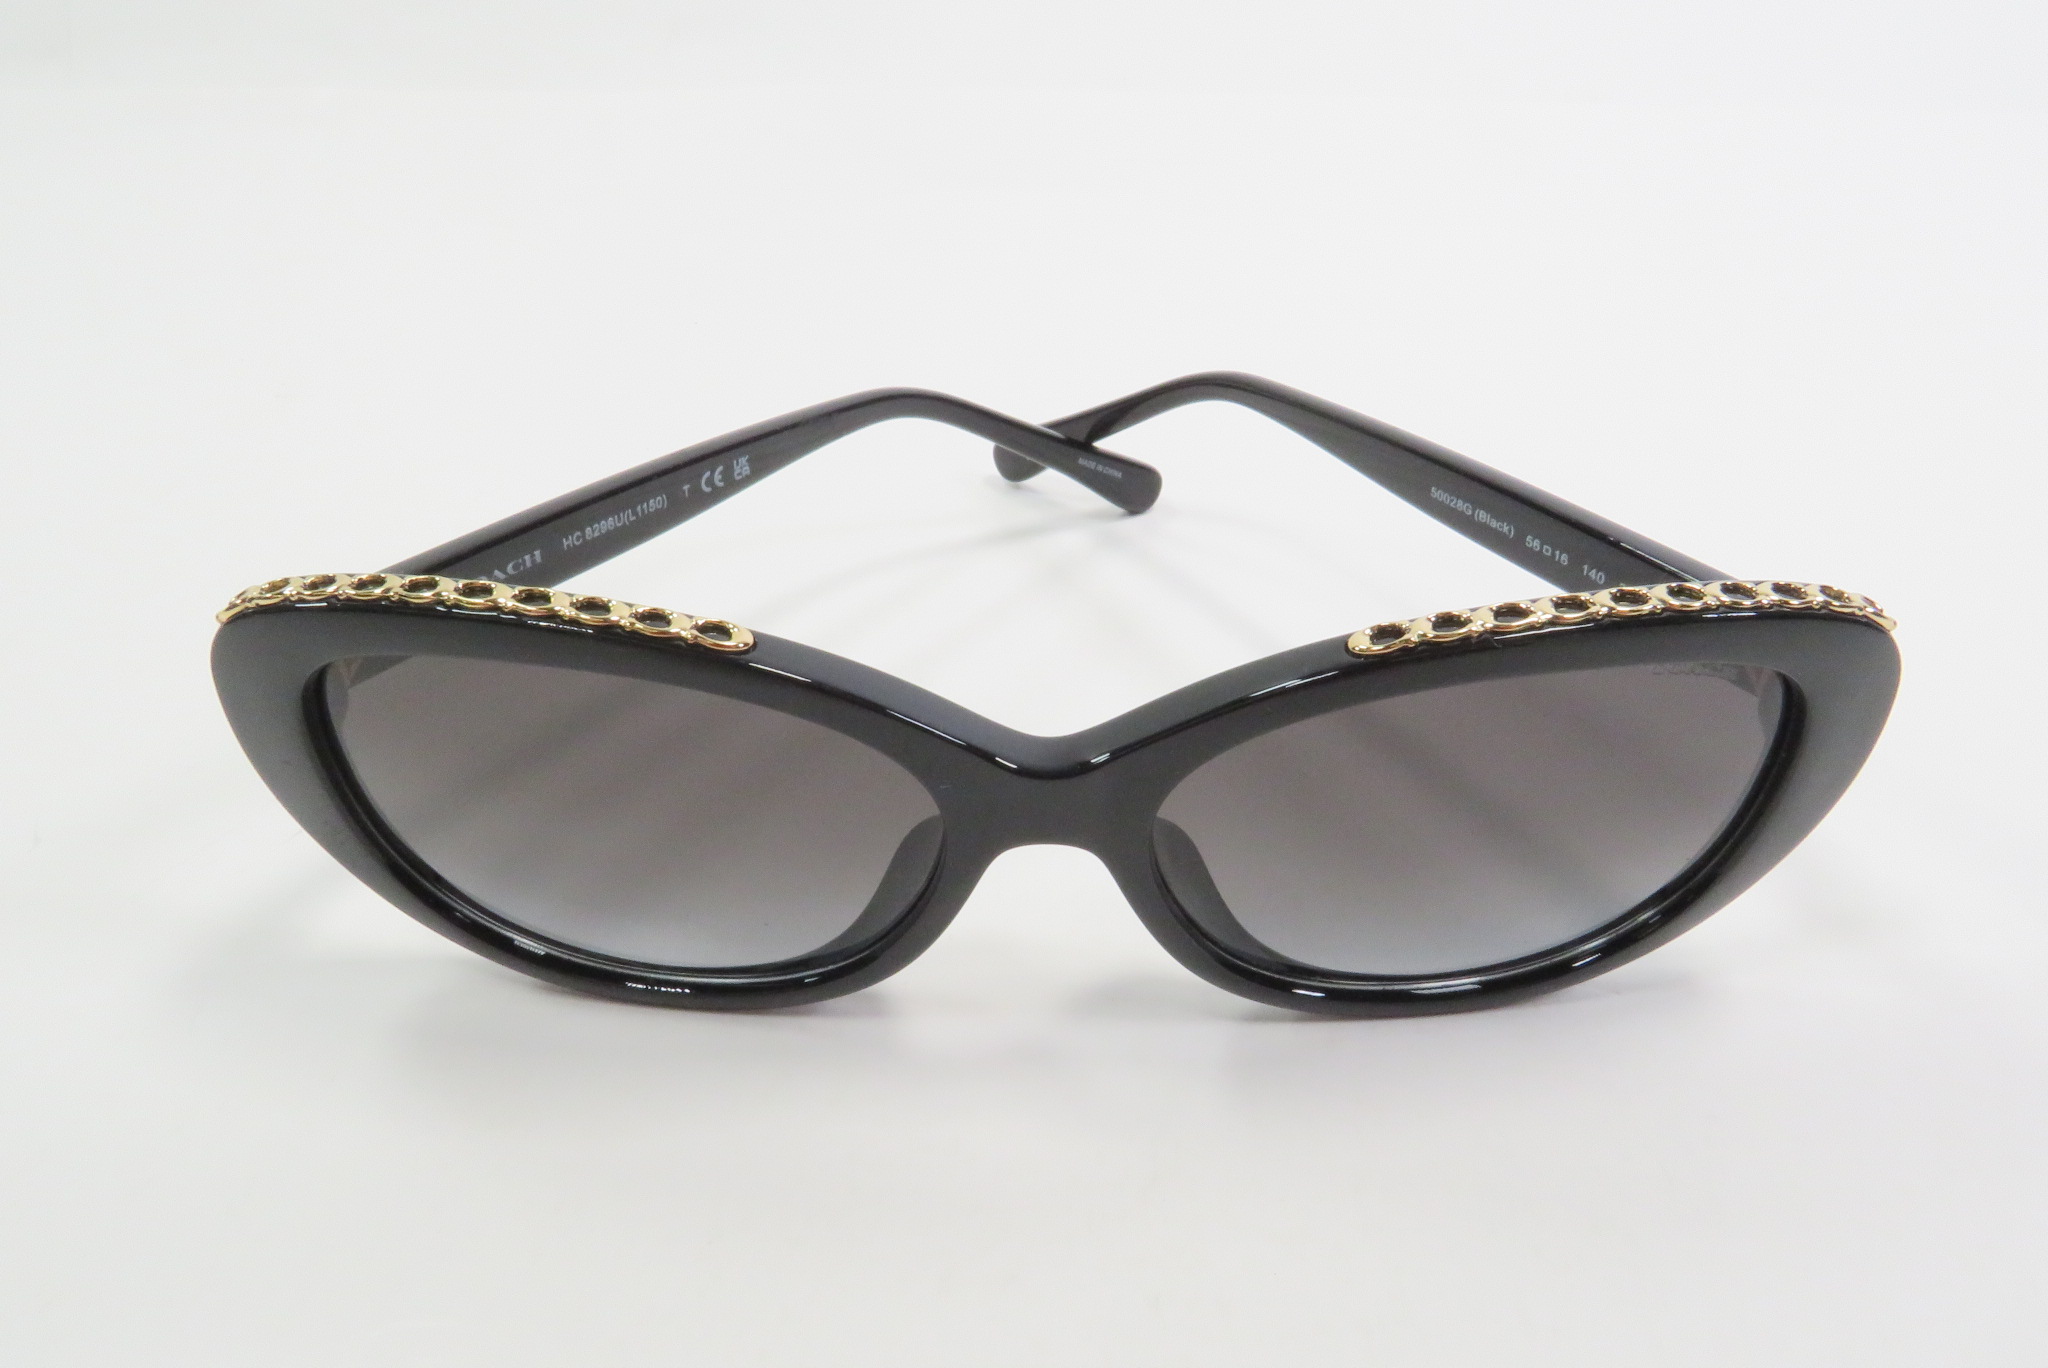 chanel sunglasses with pearls on side